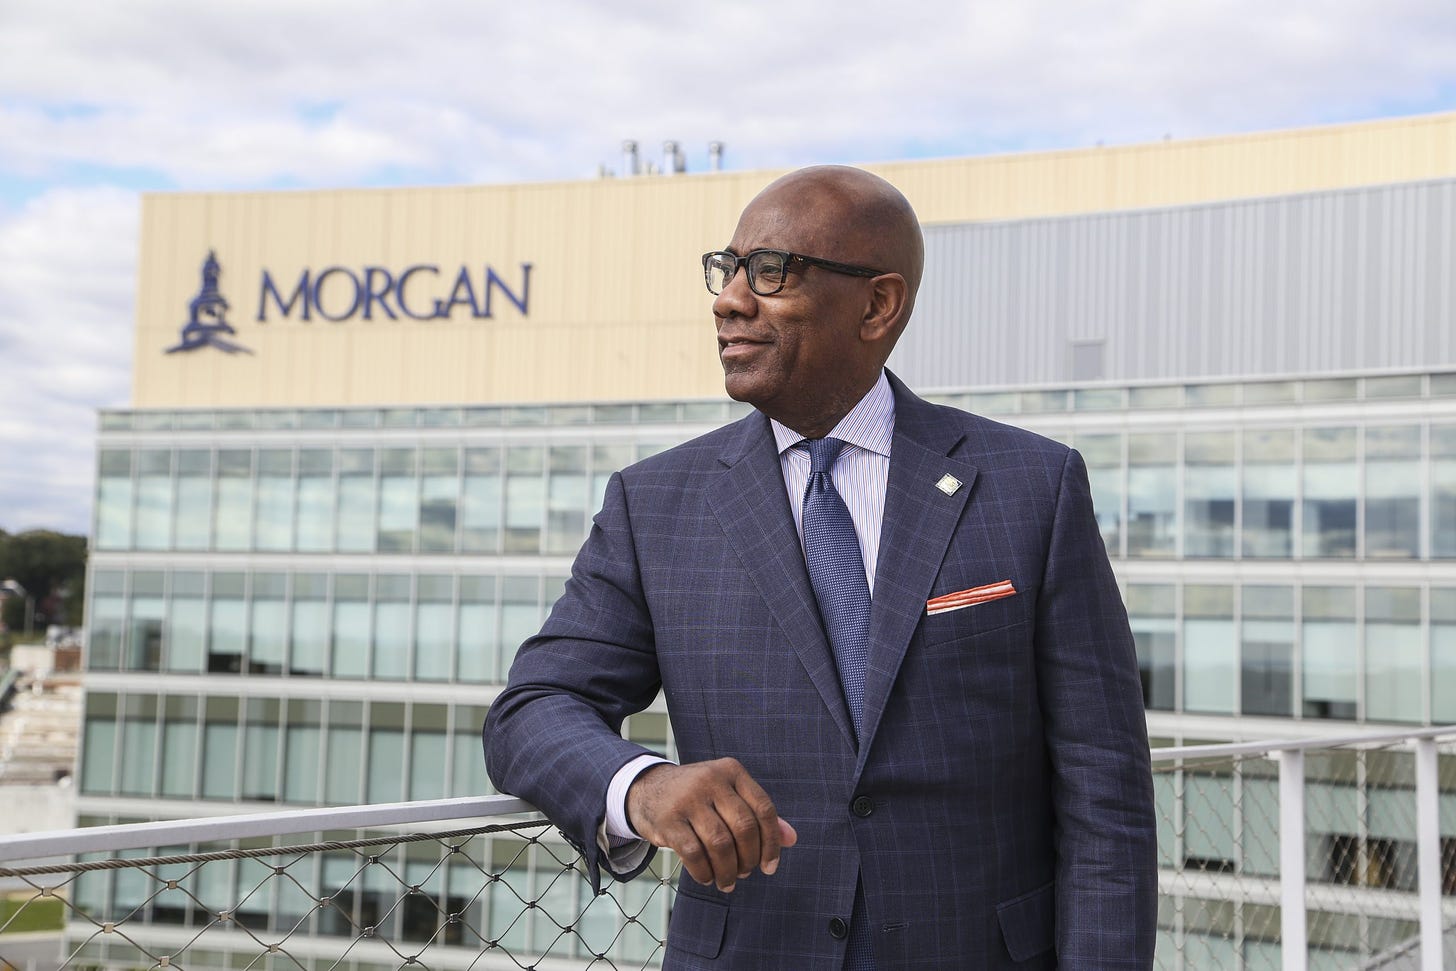 Morgan State University President Receives Authorization to Pursue  Affiliate Agreement to Add New College of Osteopathic Medicine – Morgan  State University Newsroom